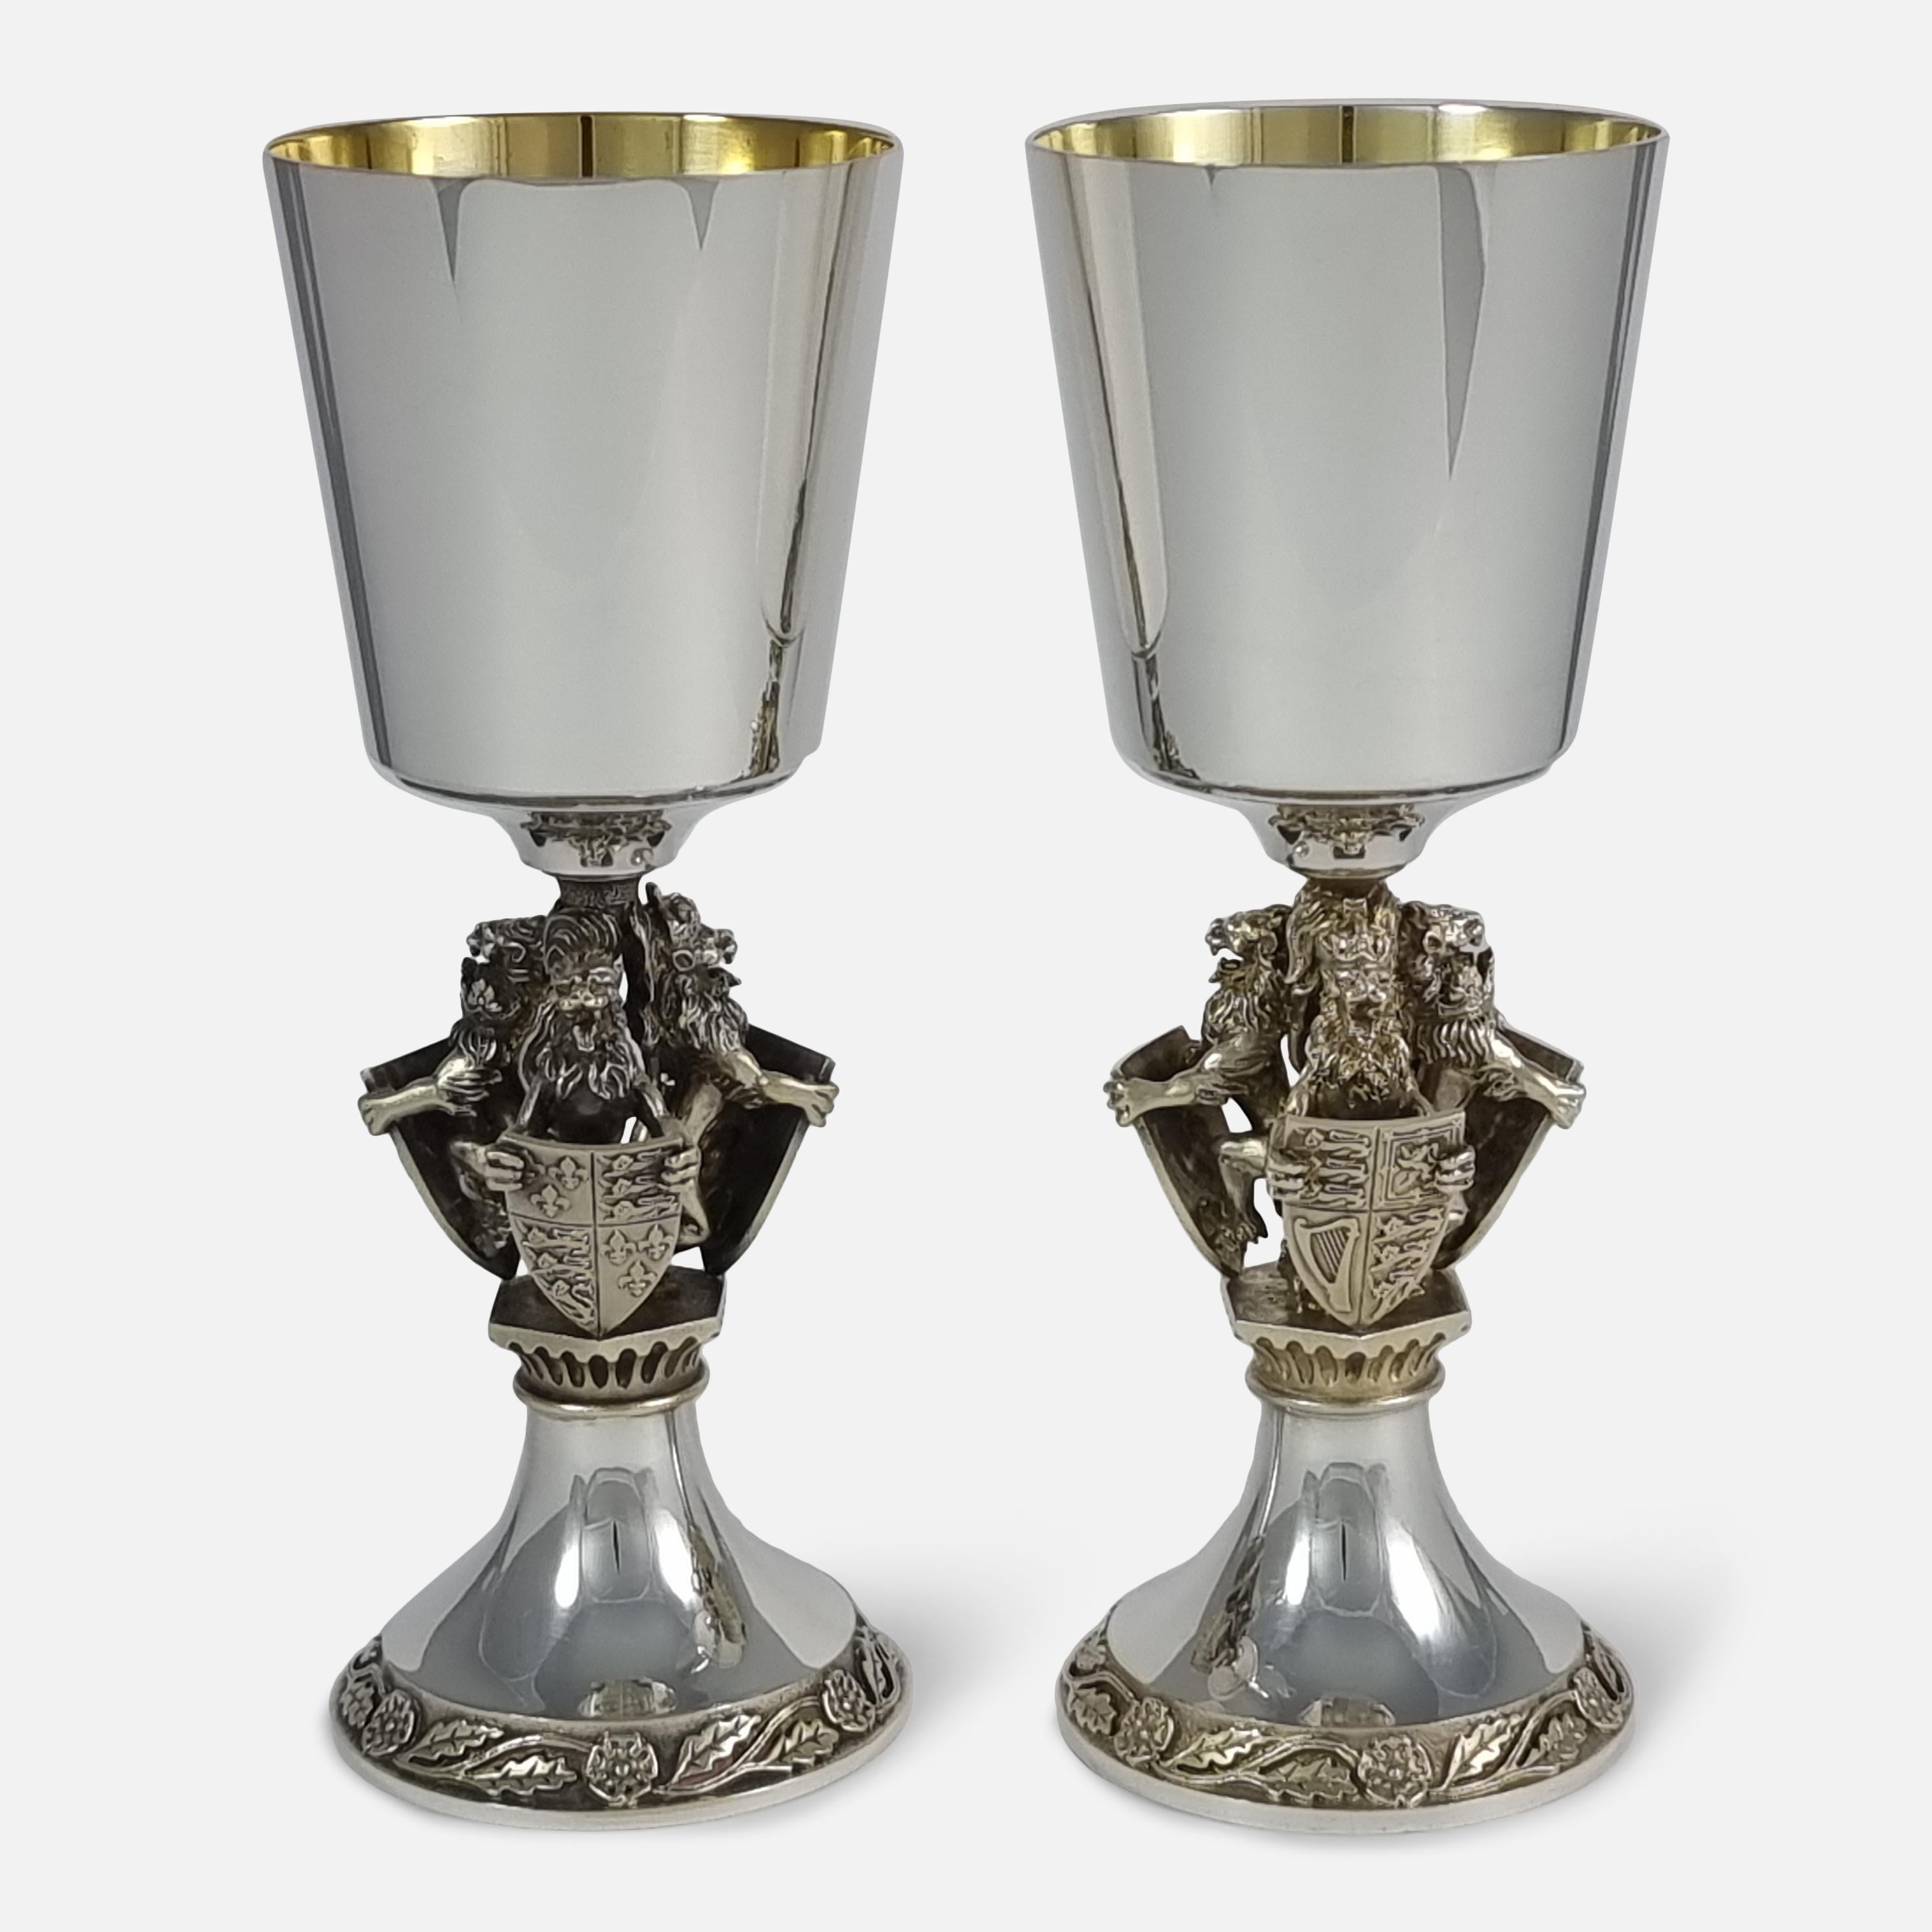 Set of Four Aurum Silver Gilt 'College of Arms' Goblets, Hector Miller, 1984 For Sale 1